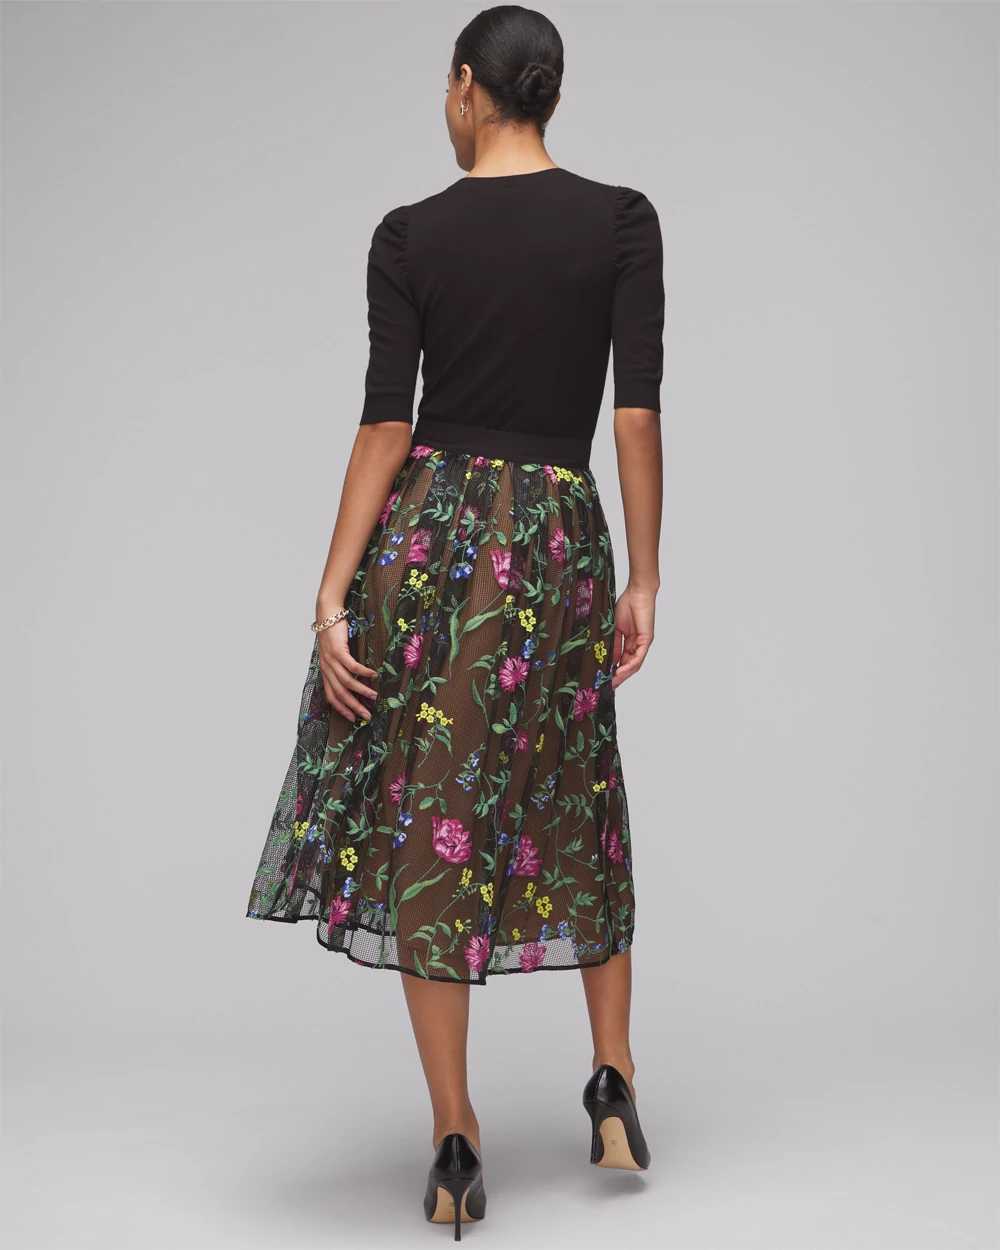 Embroidered Fit & Flare Skirt click to view larger image.